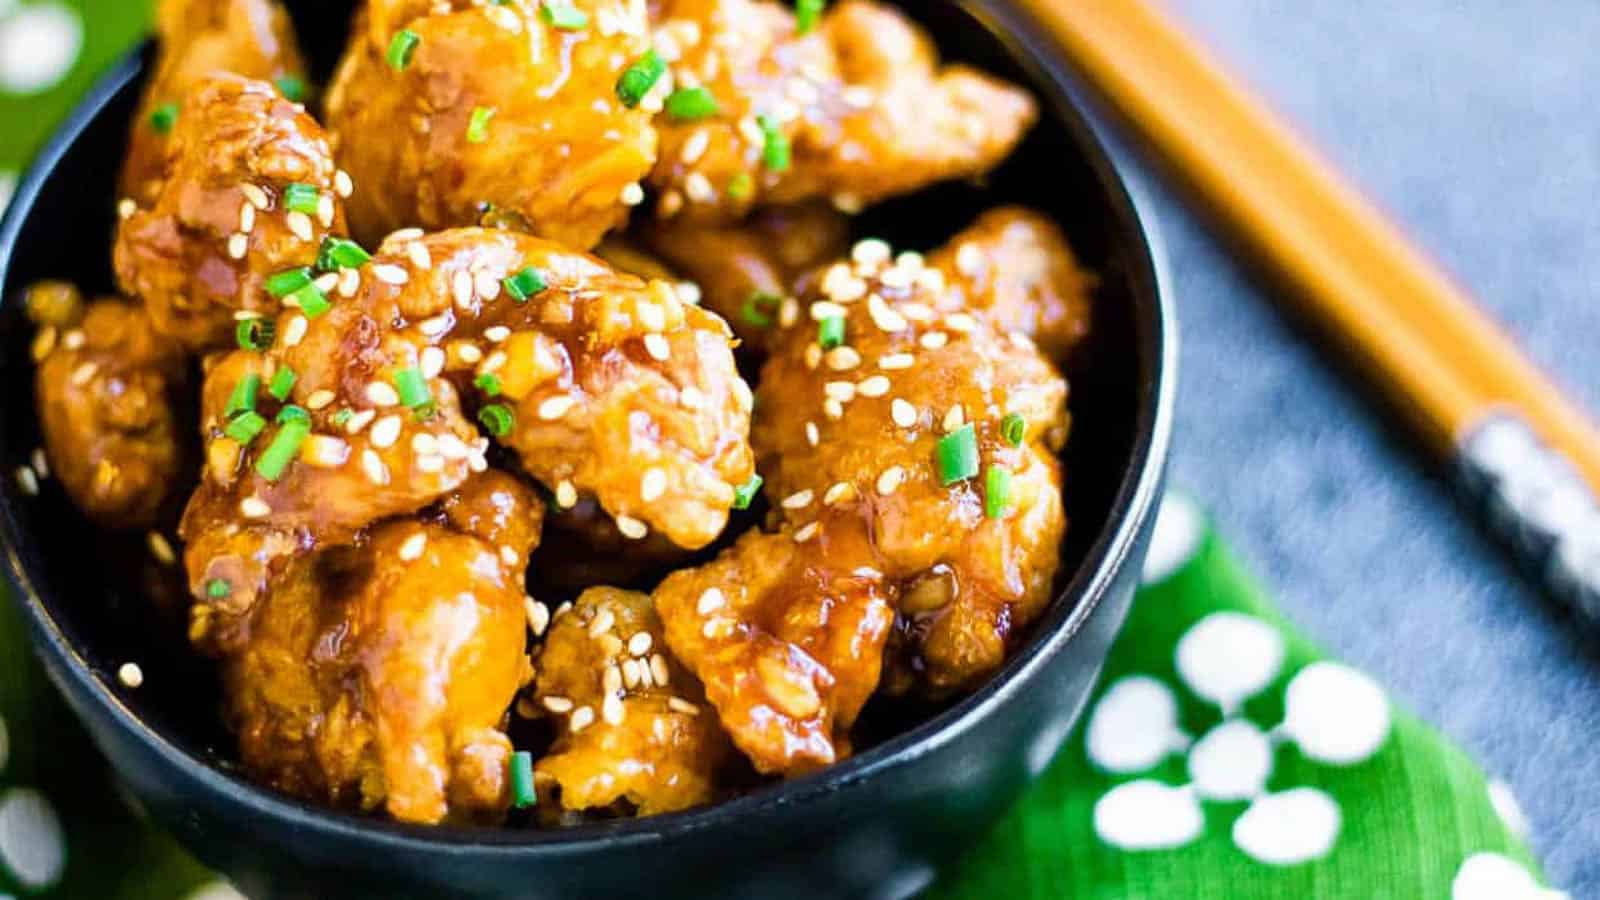 <p>Air fryer Orange Chicken is a mouthwatering combination of sweet, tangy and everything nice. If you ask us, it’s a flavor profile that never gets old. Just one bite, and your taste buds will be asking for seconds and thirds!<br><strong>Get the Recipe: </strong><a href="https://allwaysdelicious.com/air-fryer-orange-chicken/?utm_source=msn&utm_medium=page&utm_campaign=msn">Air Fryer Orange Chicken</a></p>